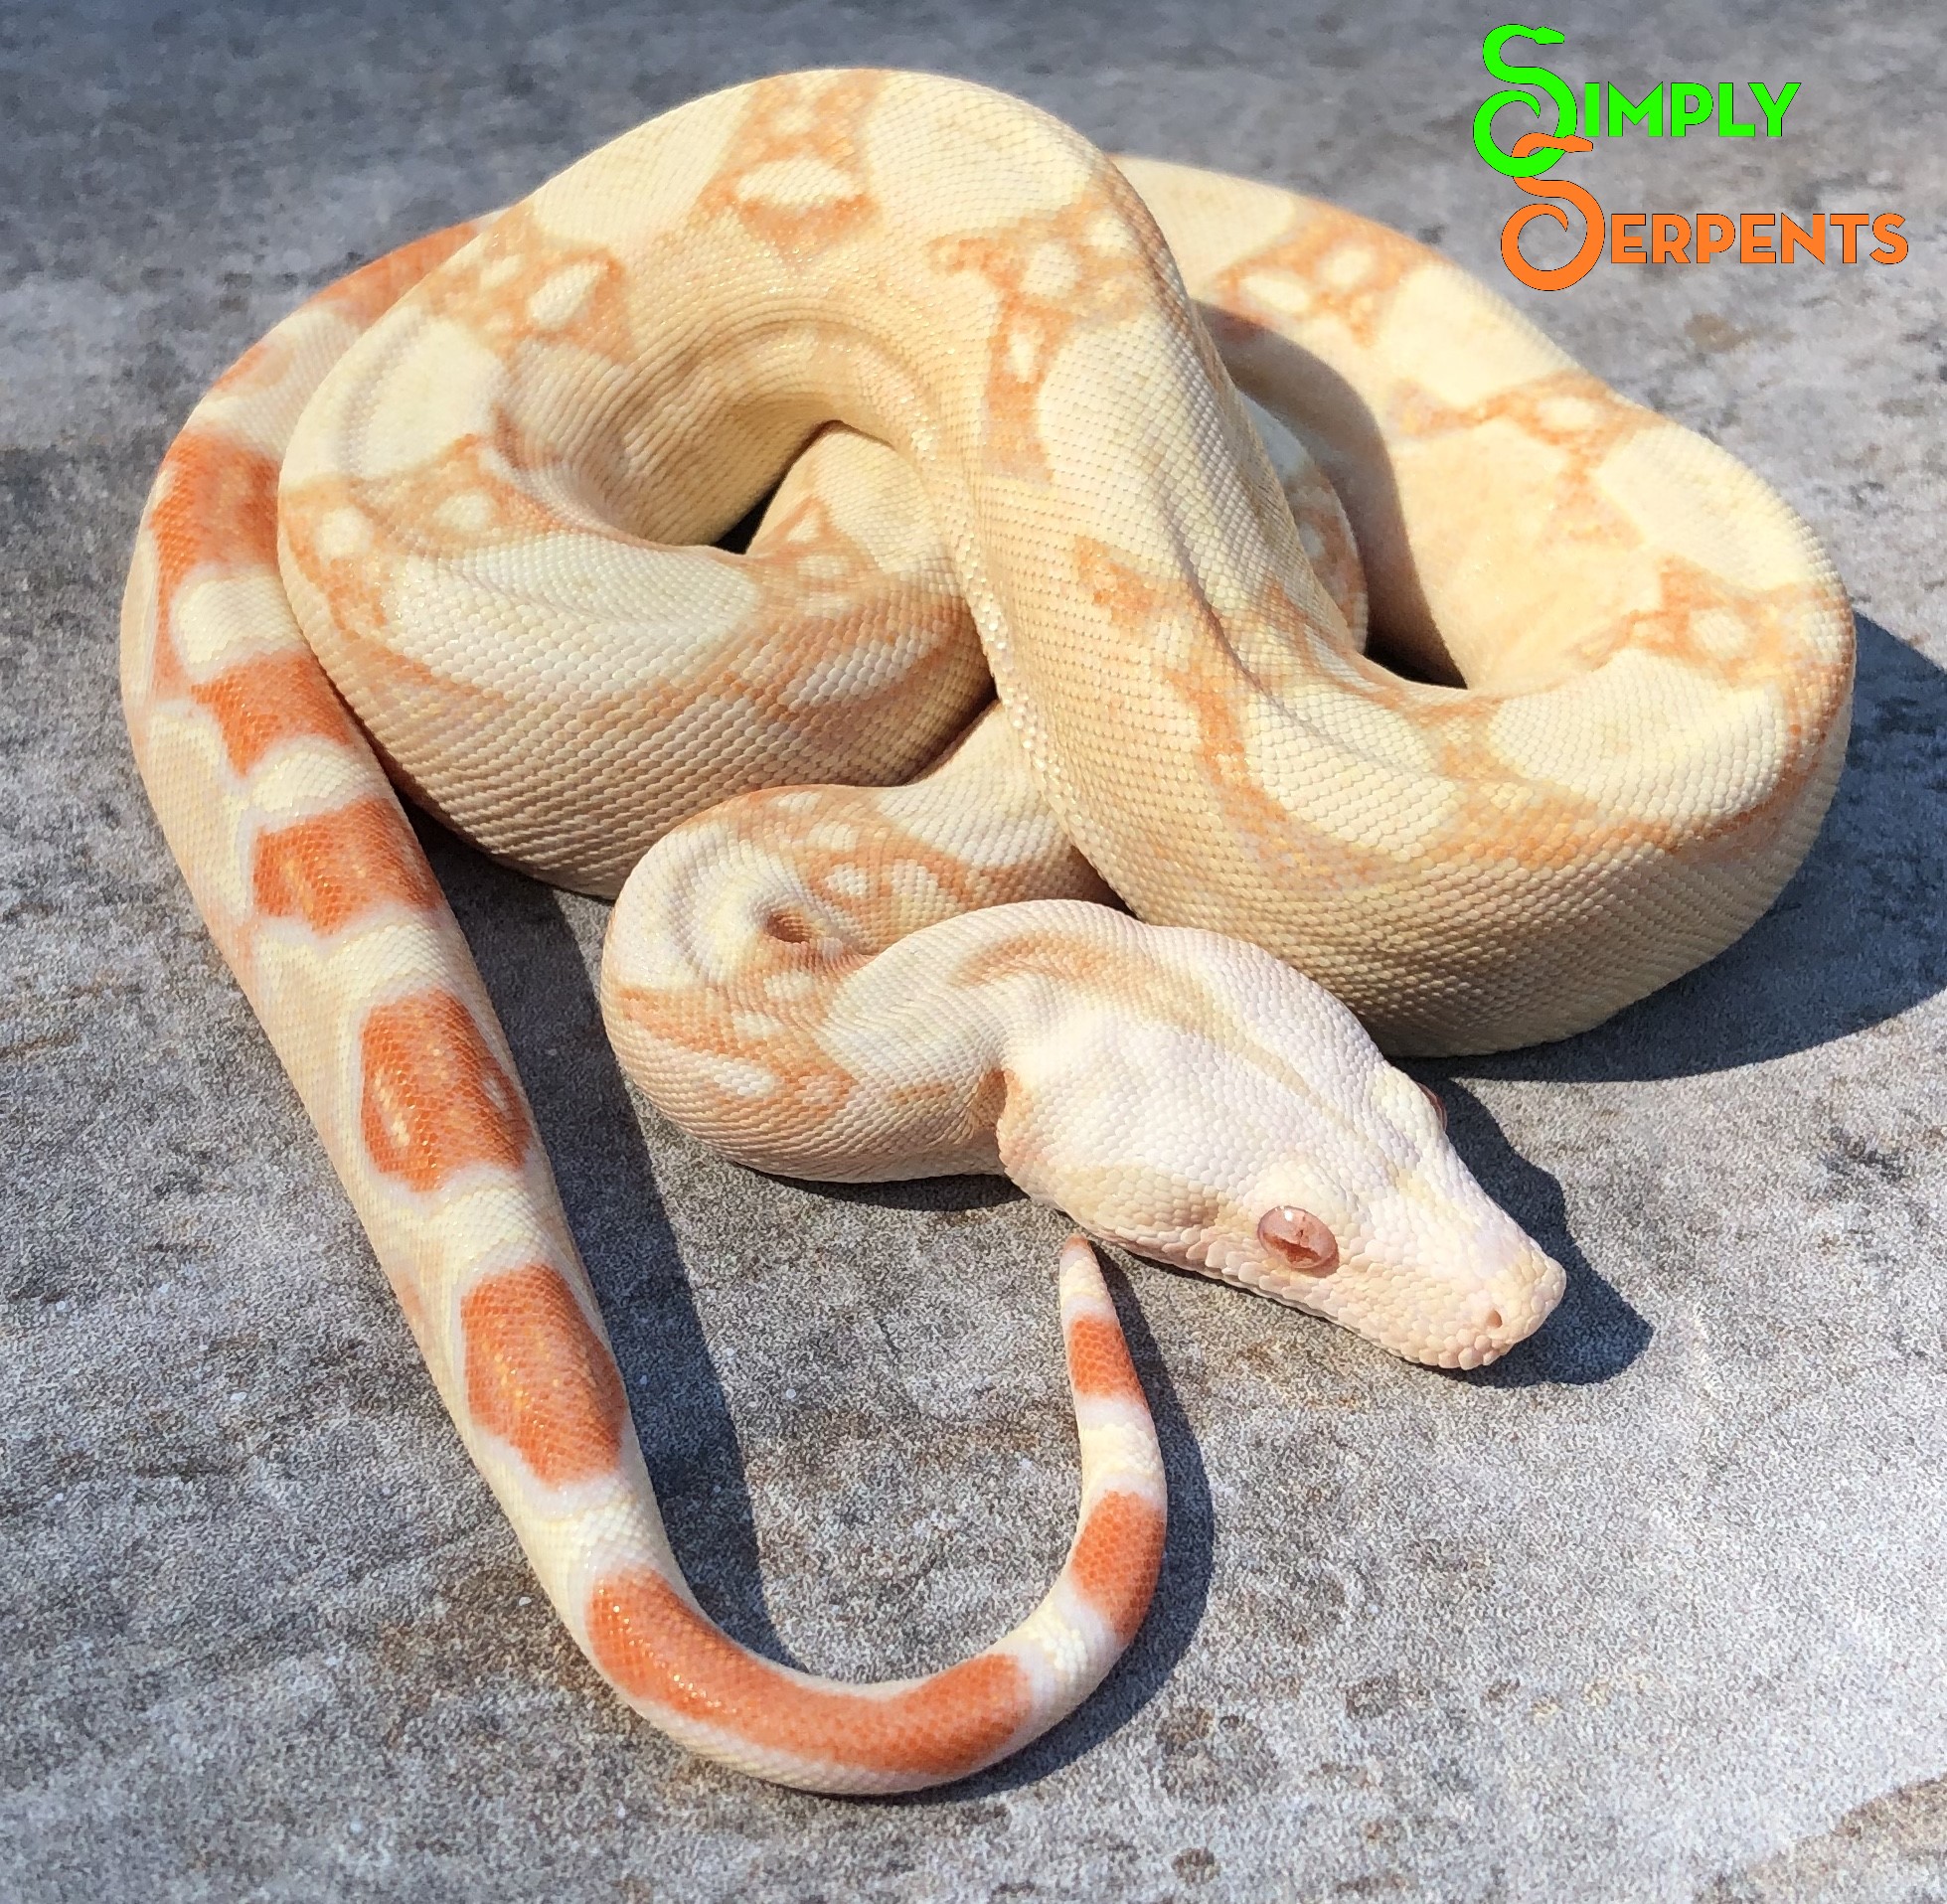 Kahl Albino Boa Constrictor by Simply Serpents